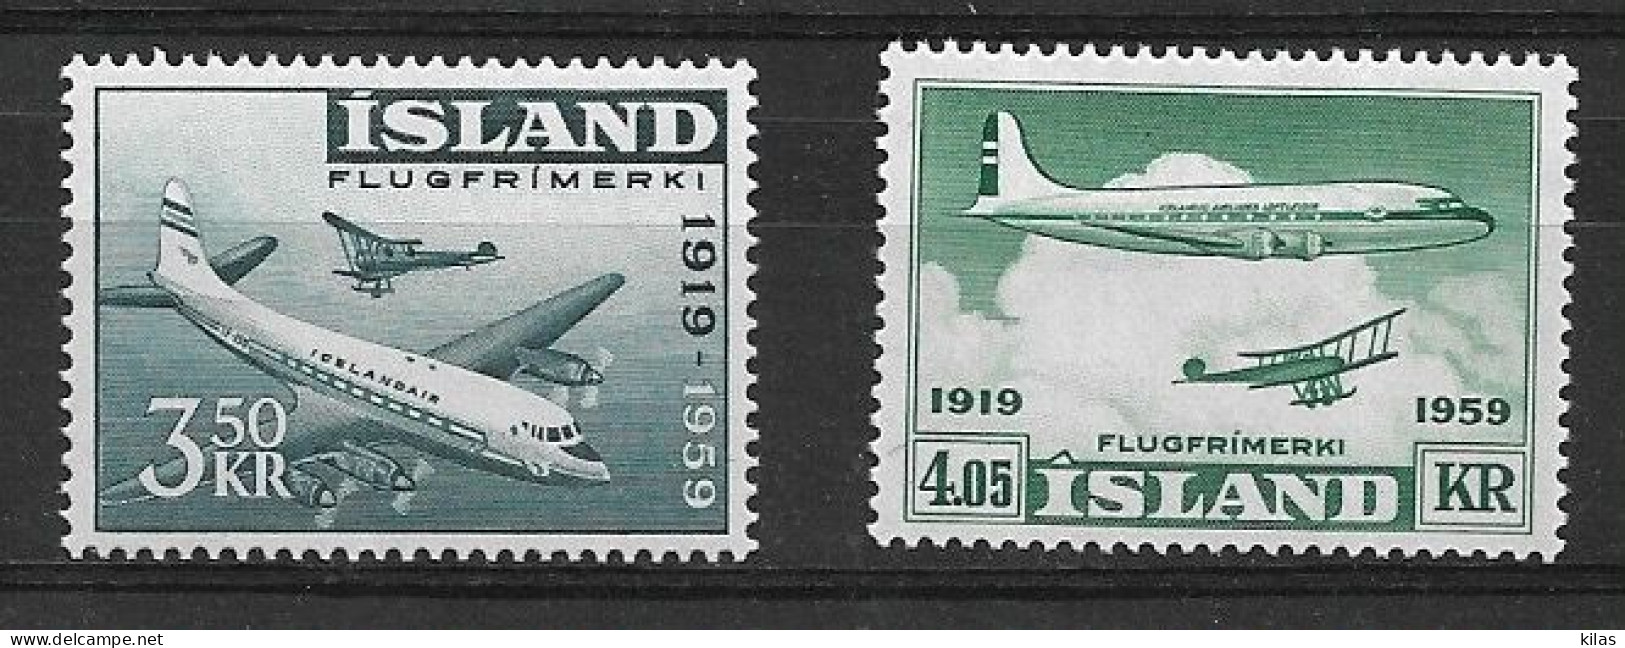 ICELAND 1959 Airmal 40TH ANNIVERSARY OF ICELANDIAN AVIATION  MNH - Airmail